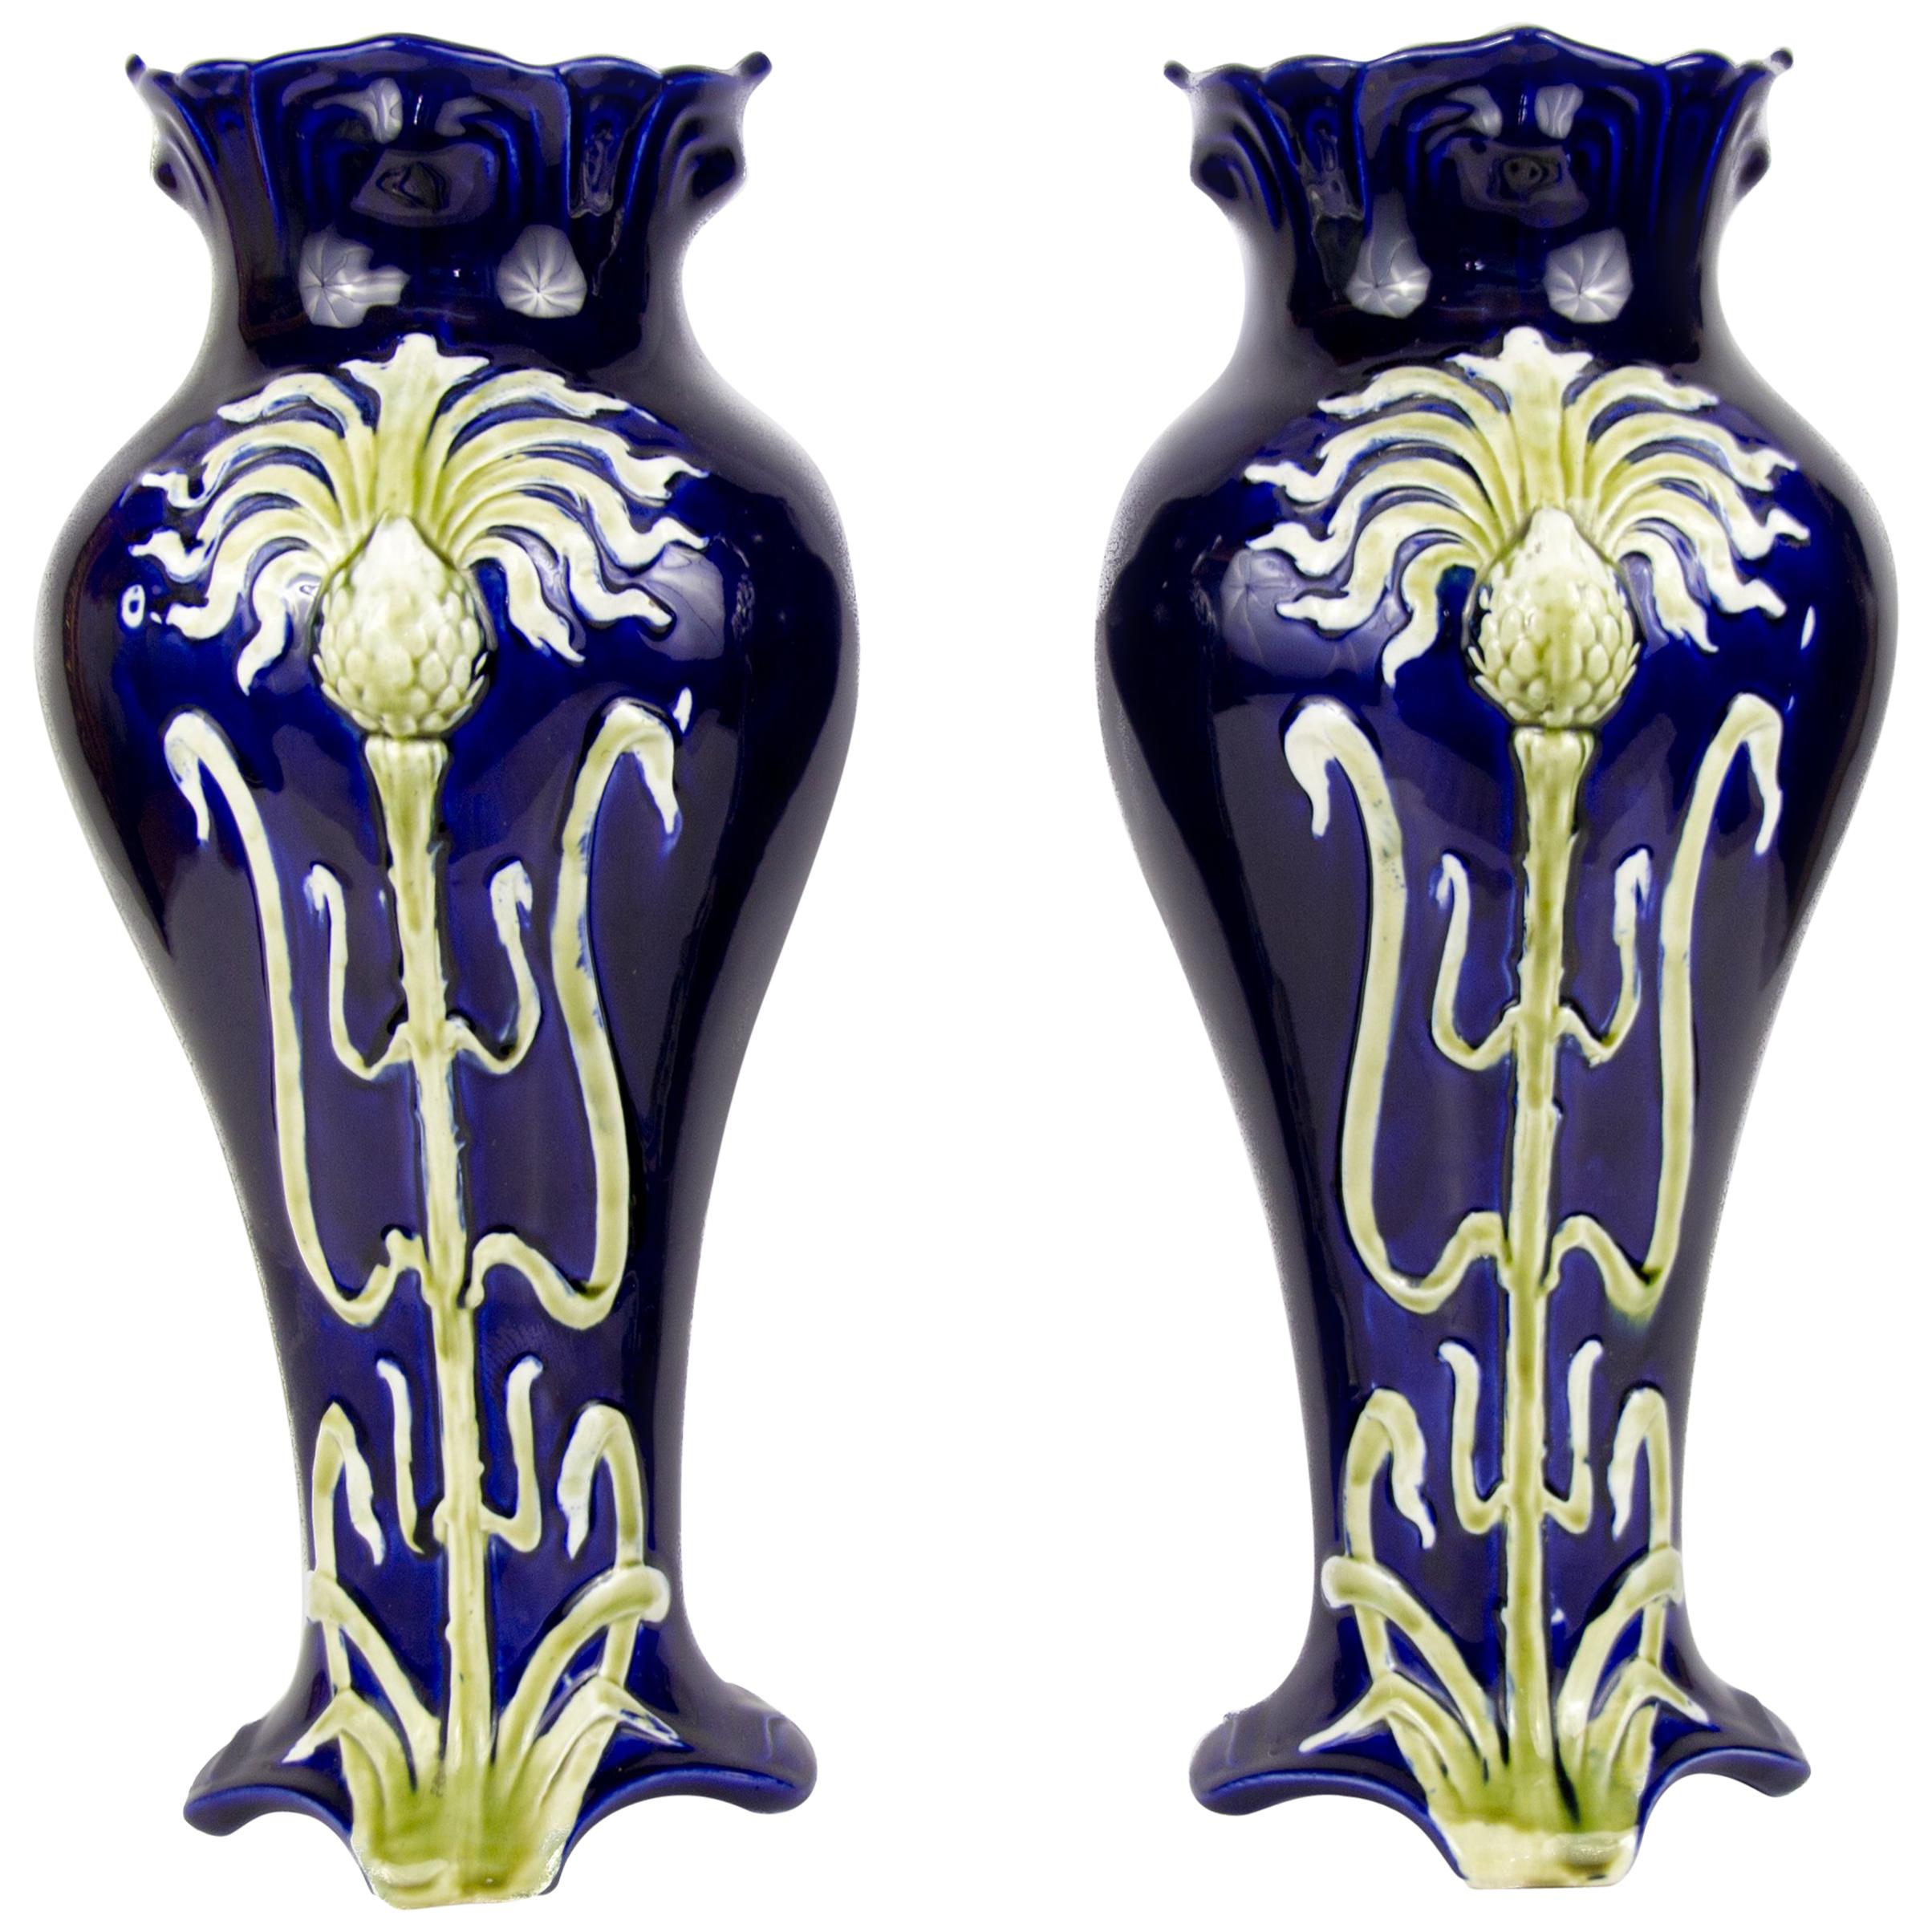 Pair of Early 20th Century French Art Nouveau Vases by J. Bernard De Bruyne